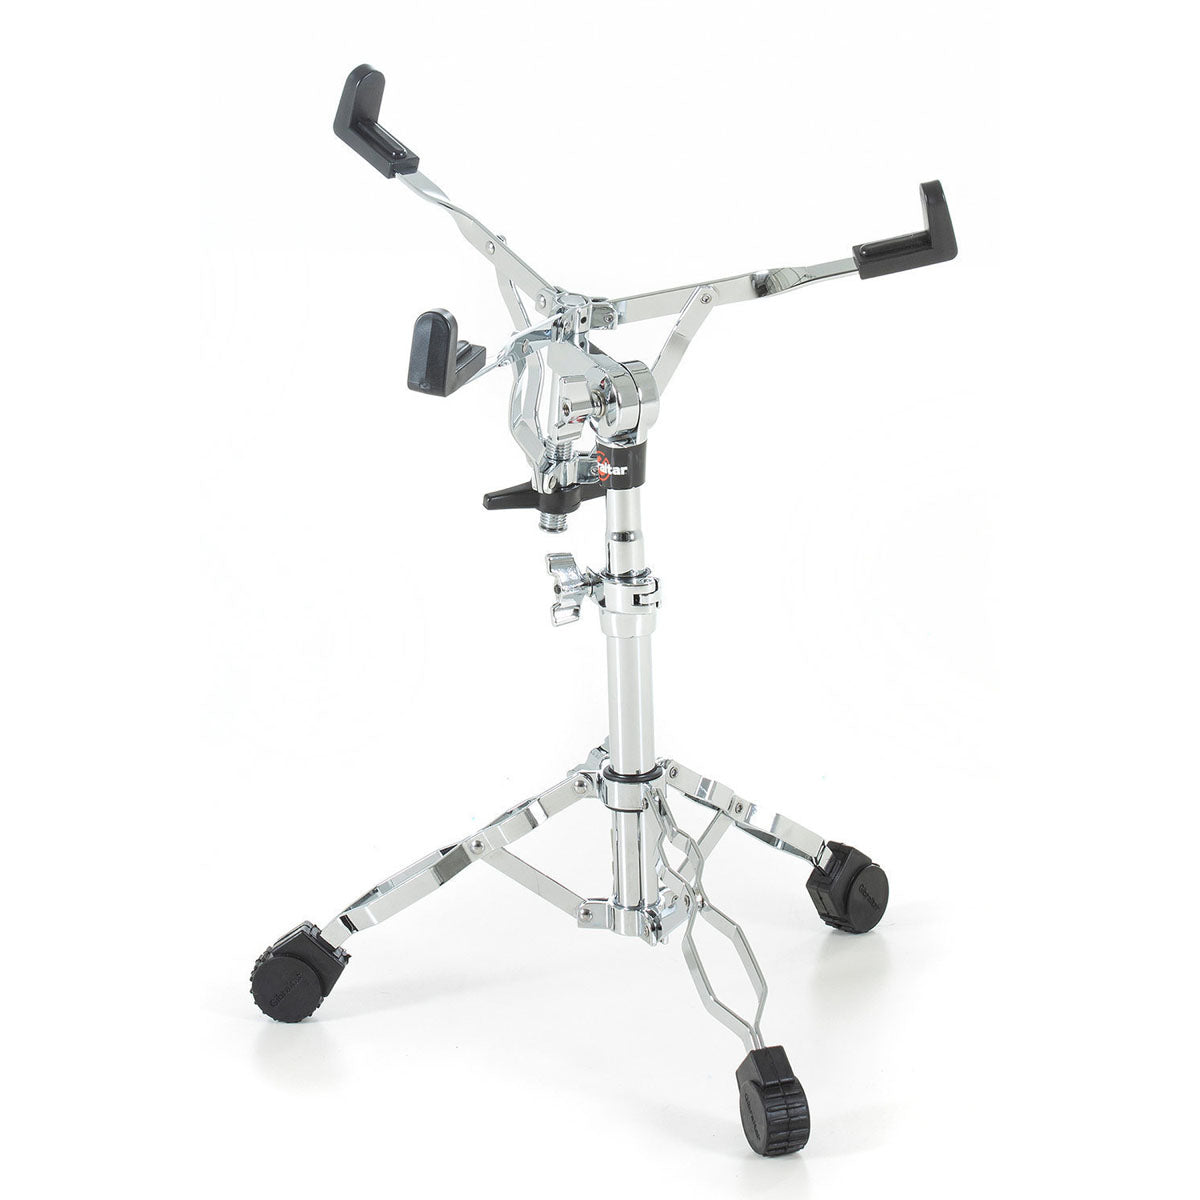 Gibraltar 5706 Double Braced Snare Stand